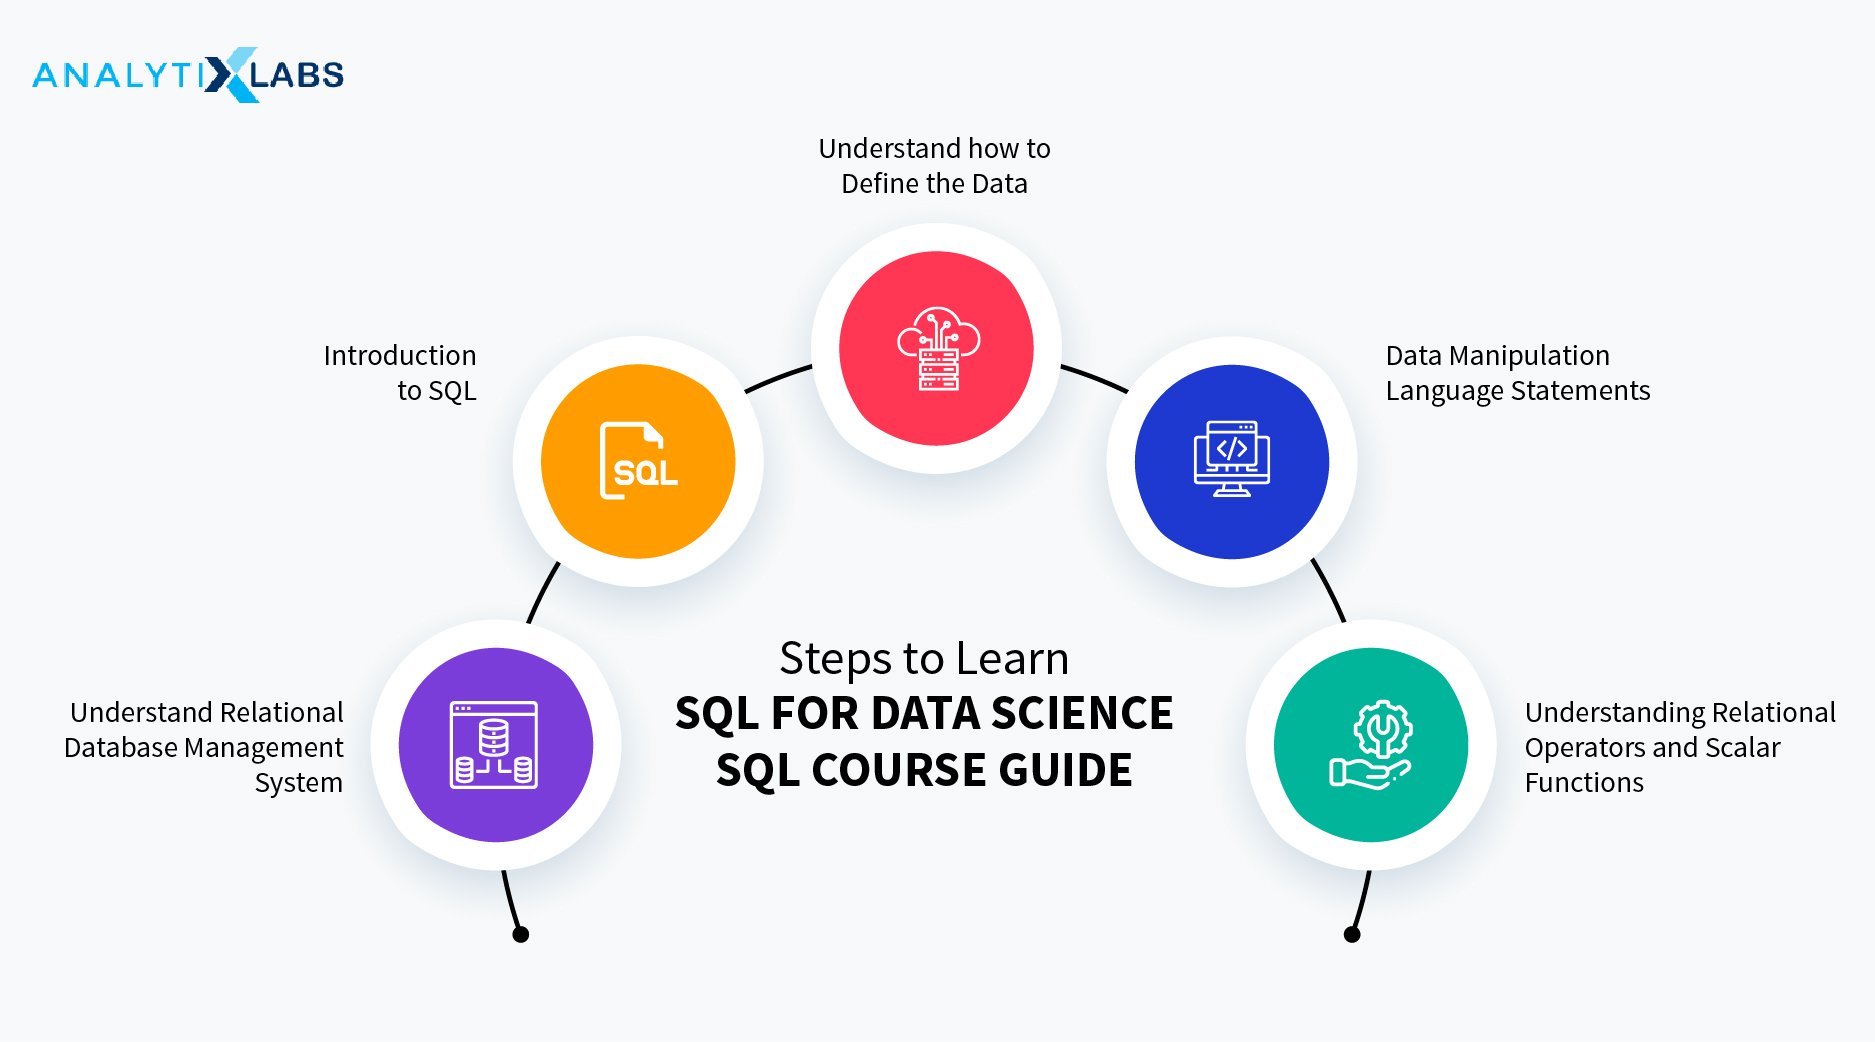 Master SQL For Data Science | Key Topics & Concepts One Should Know